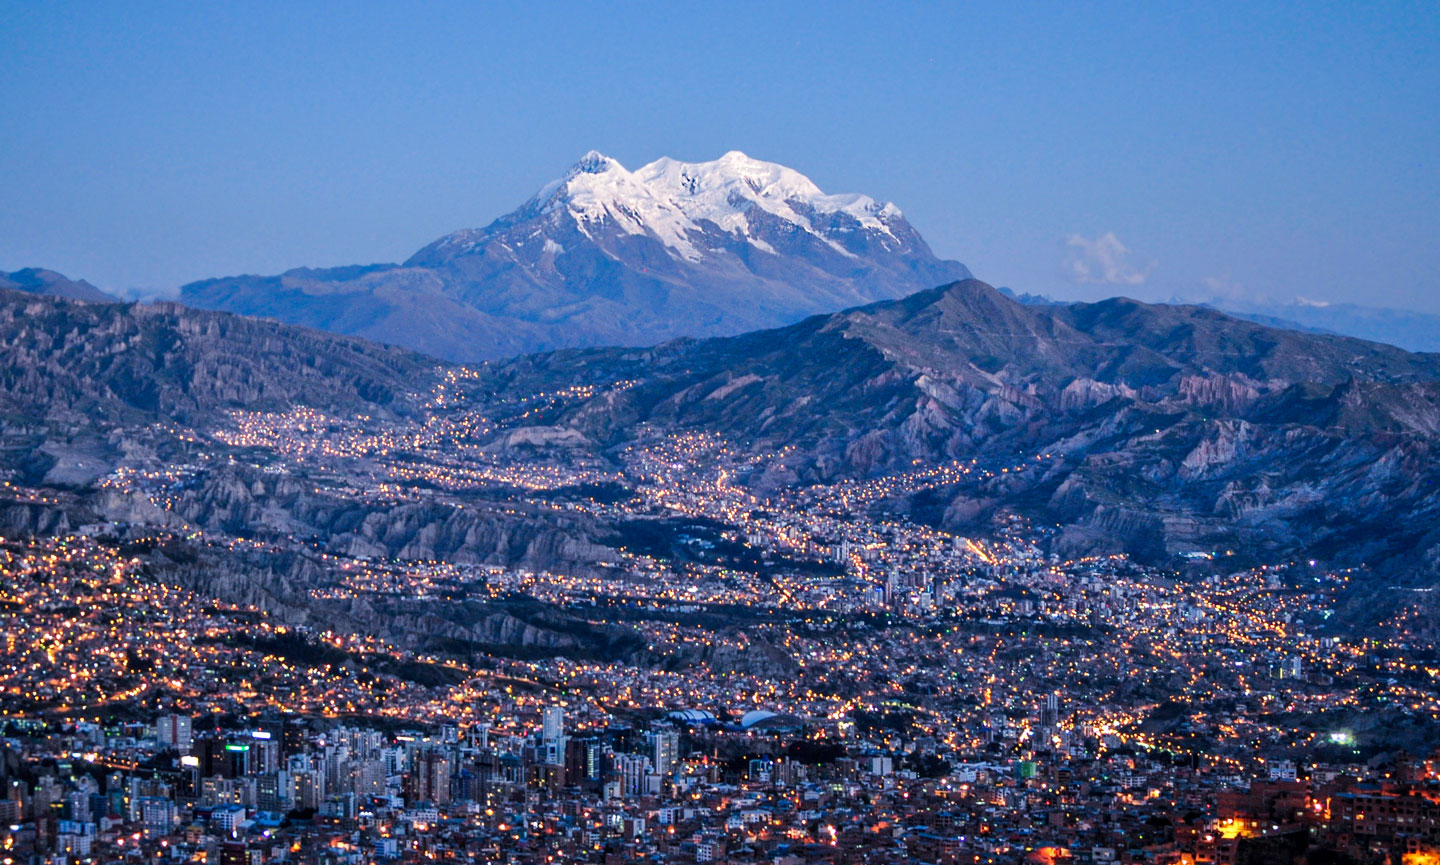 View of La Paz, Bolivia's capital city, with Illimani Mountain in the background.